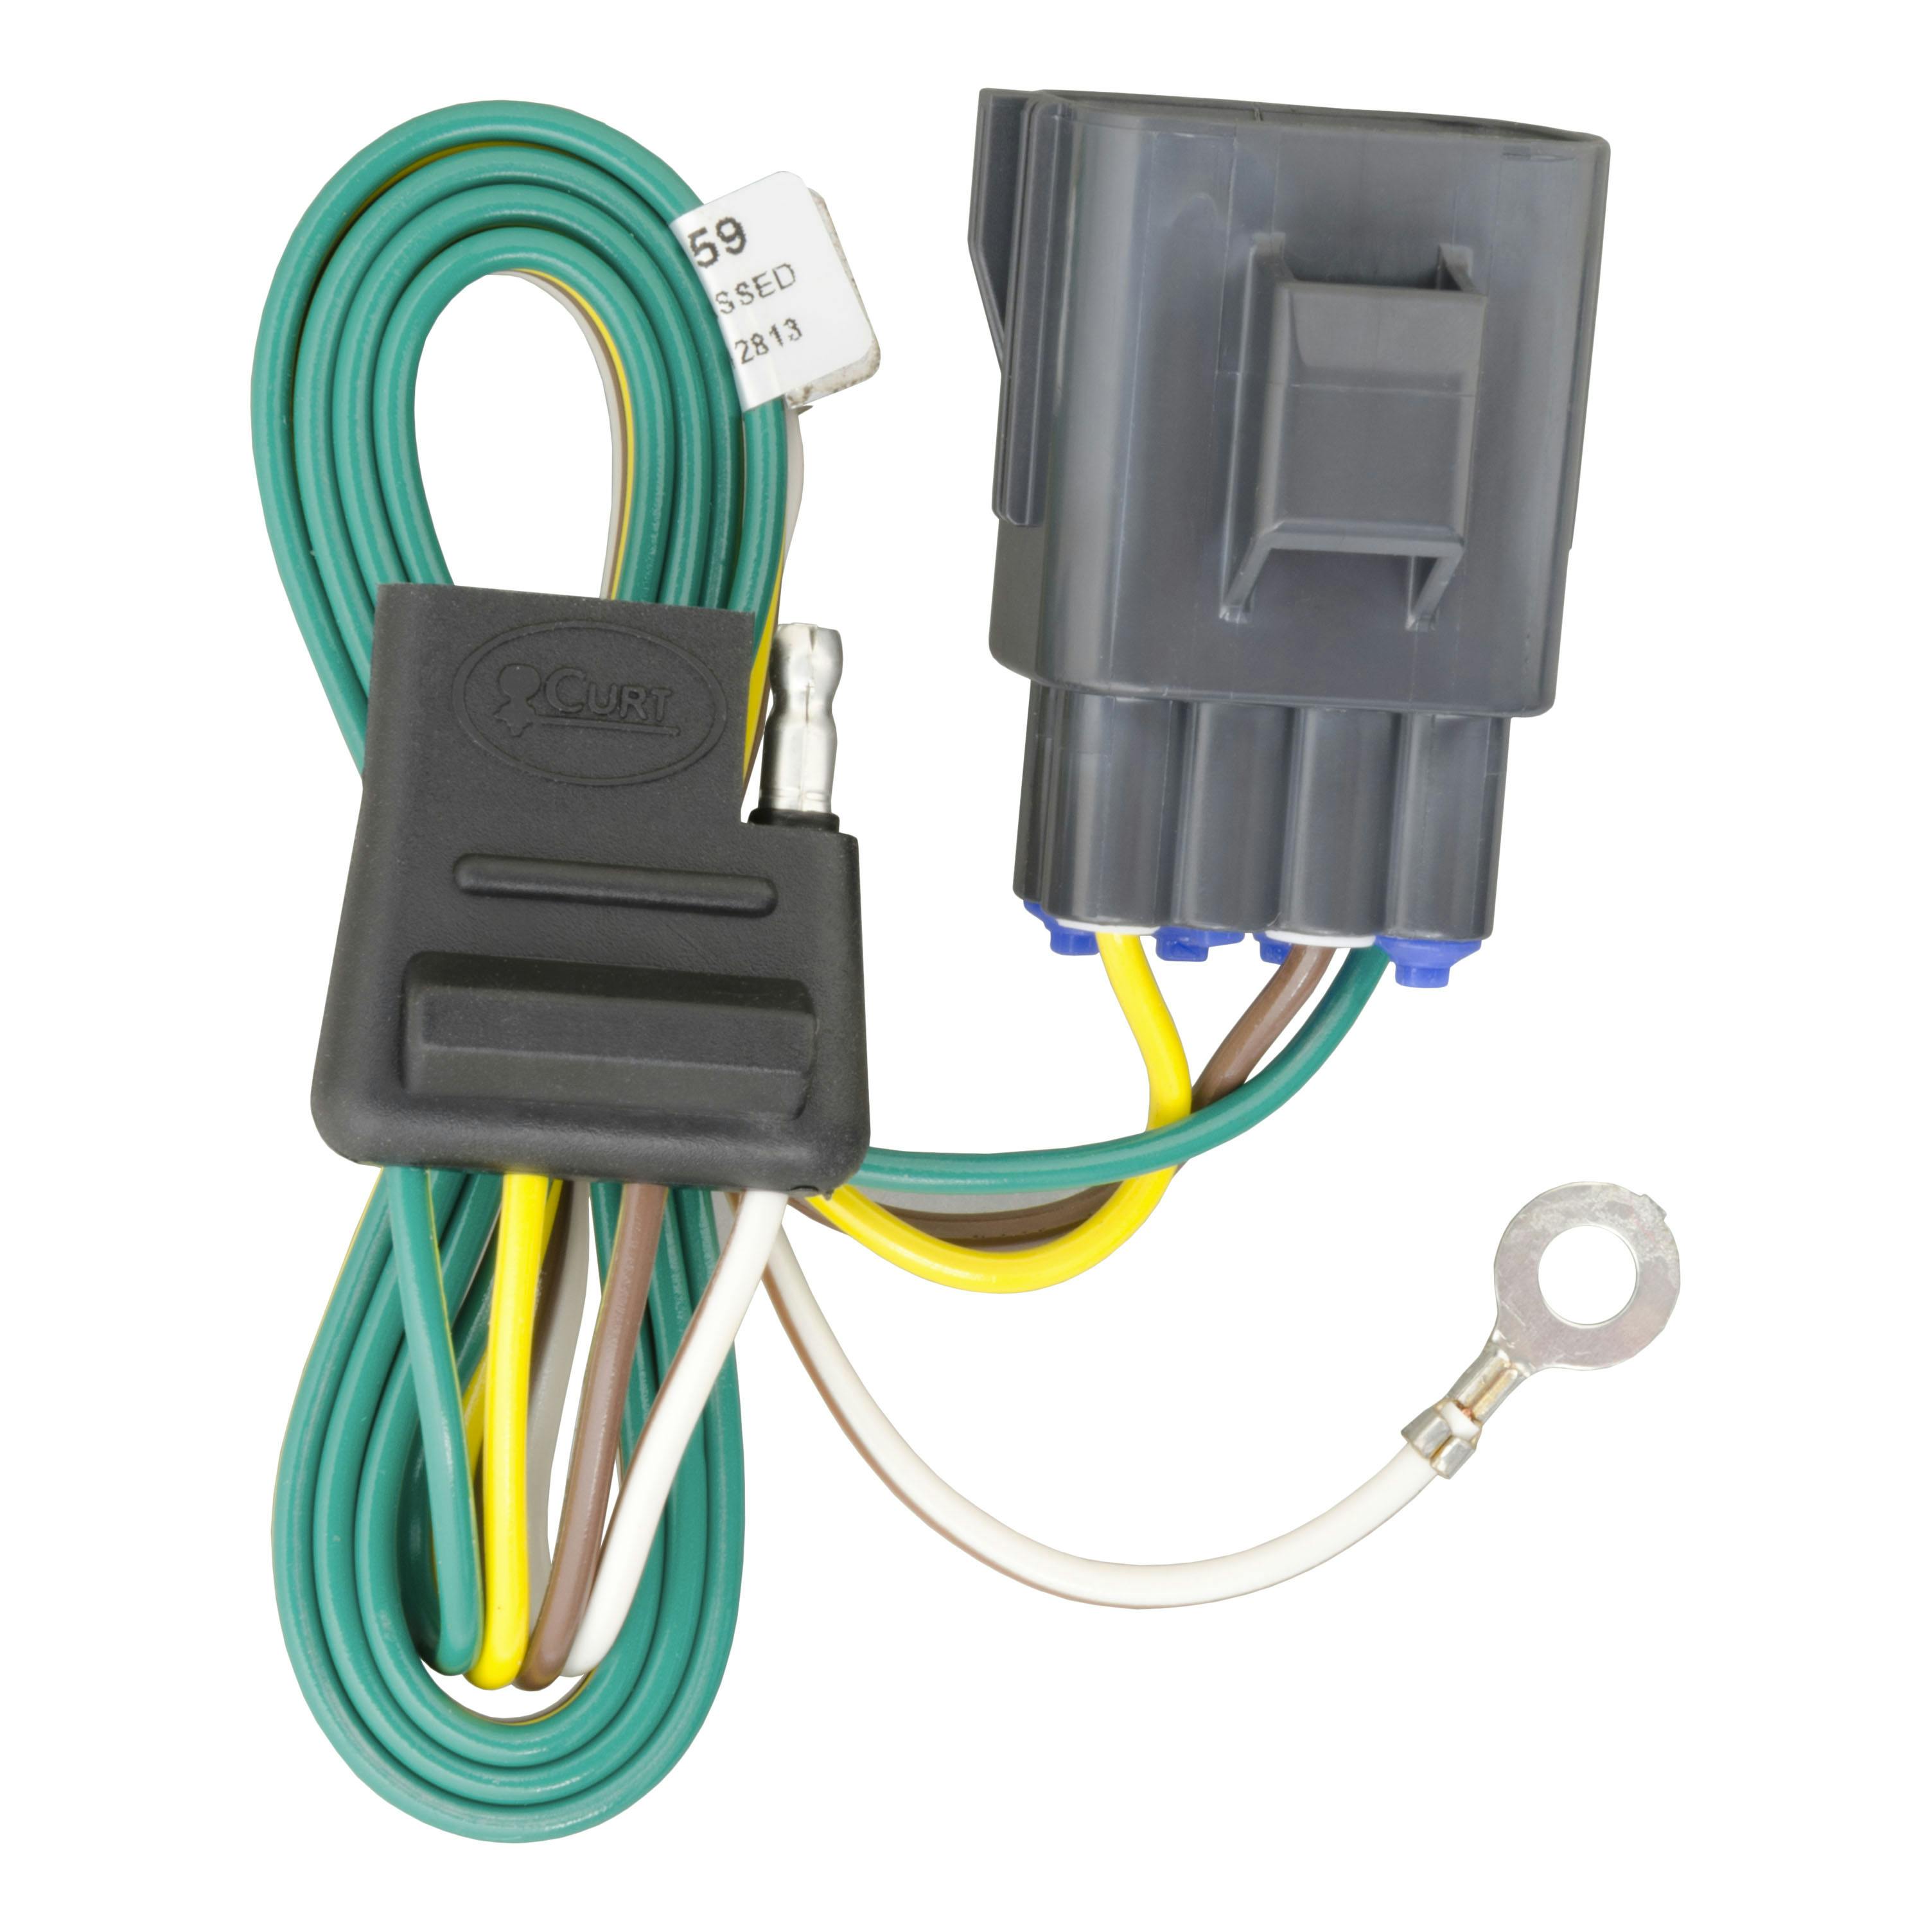 4 pin trailer connector with 5 wires